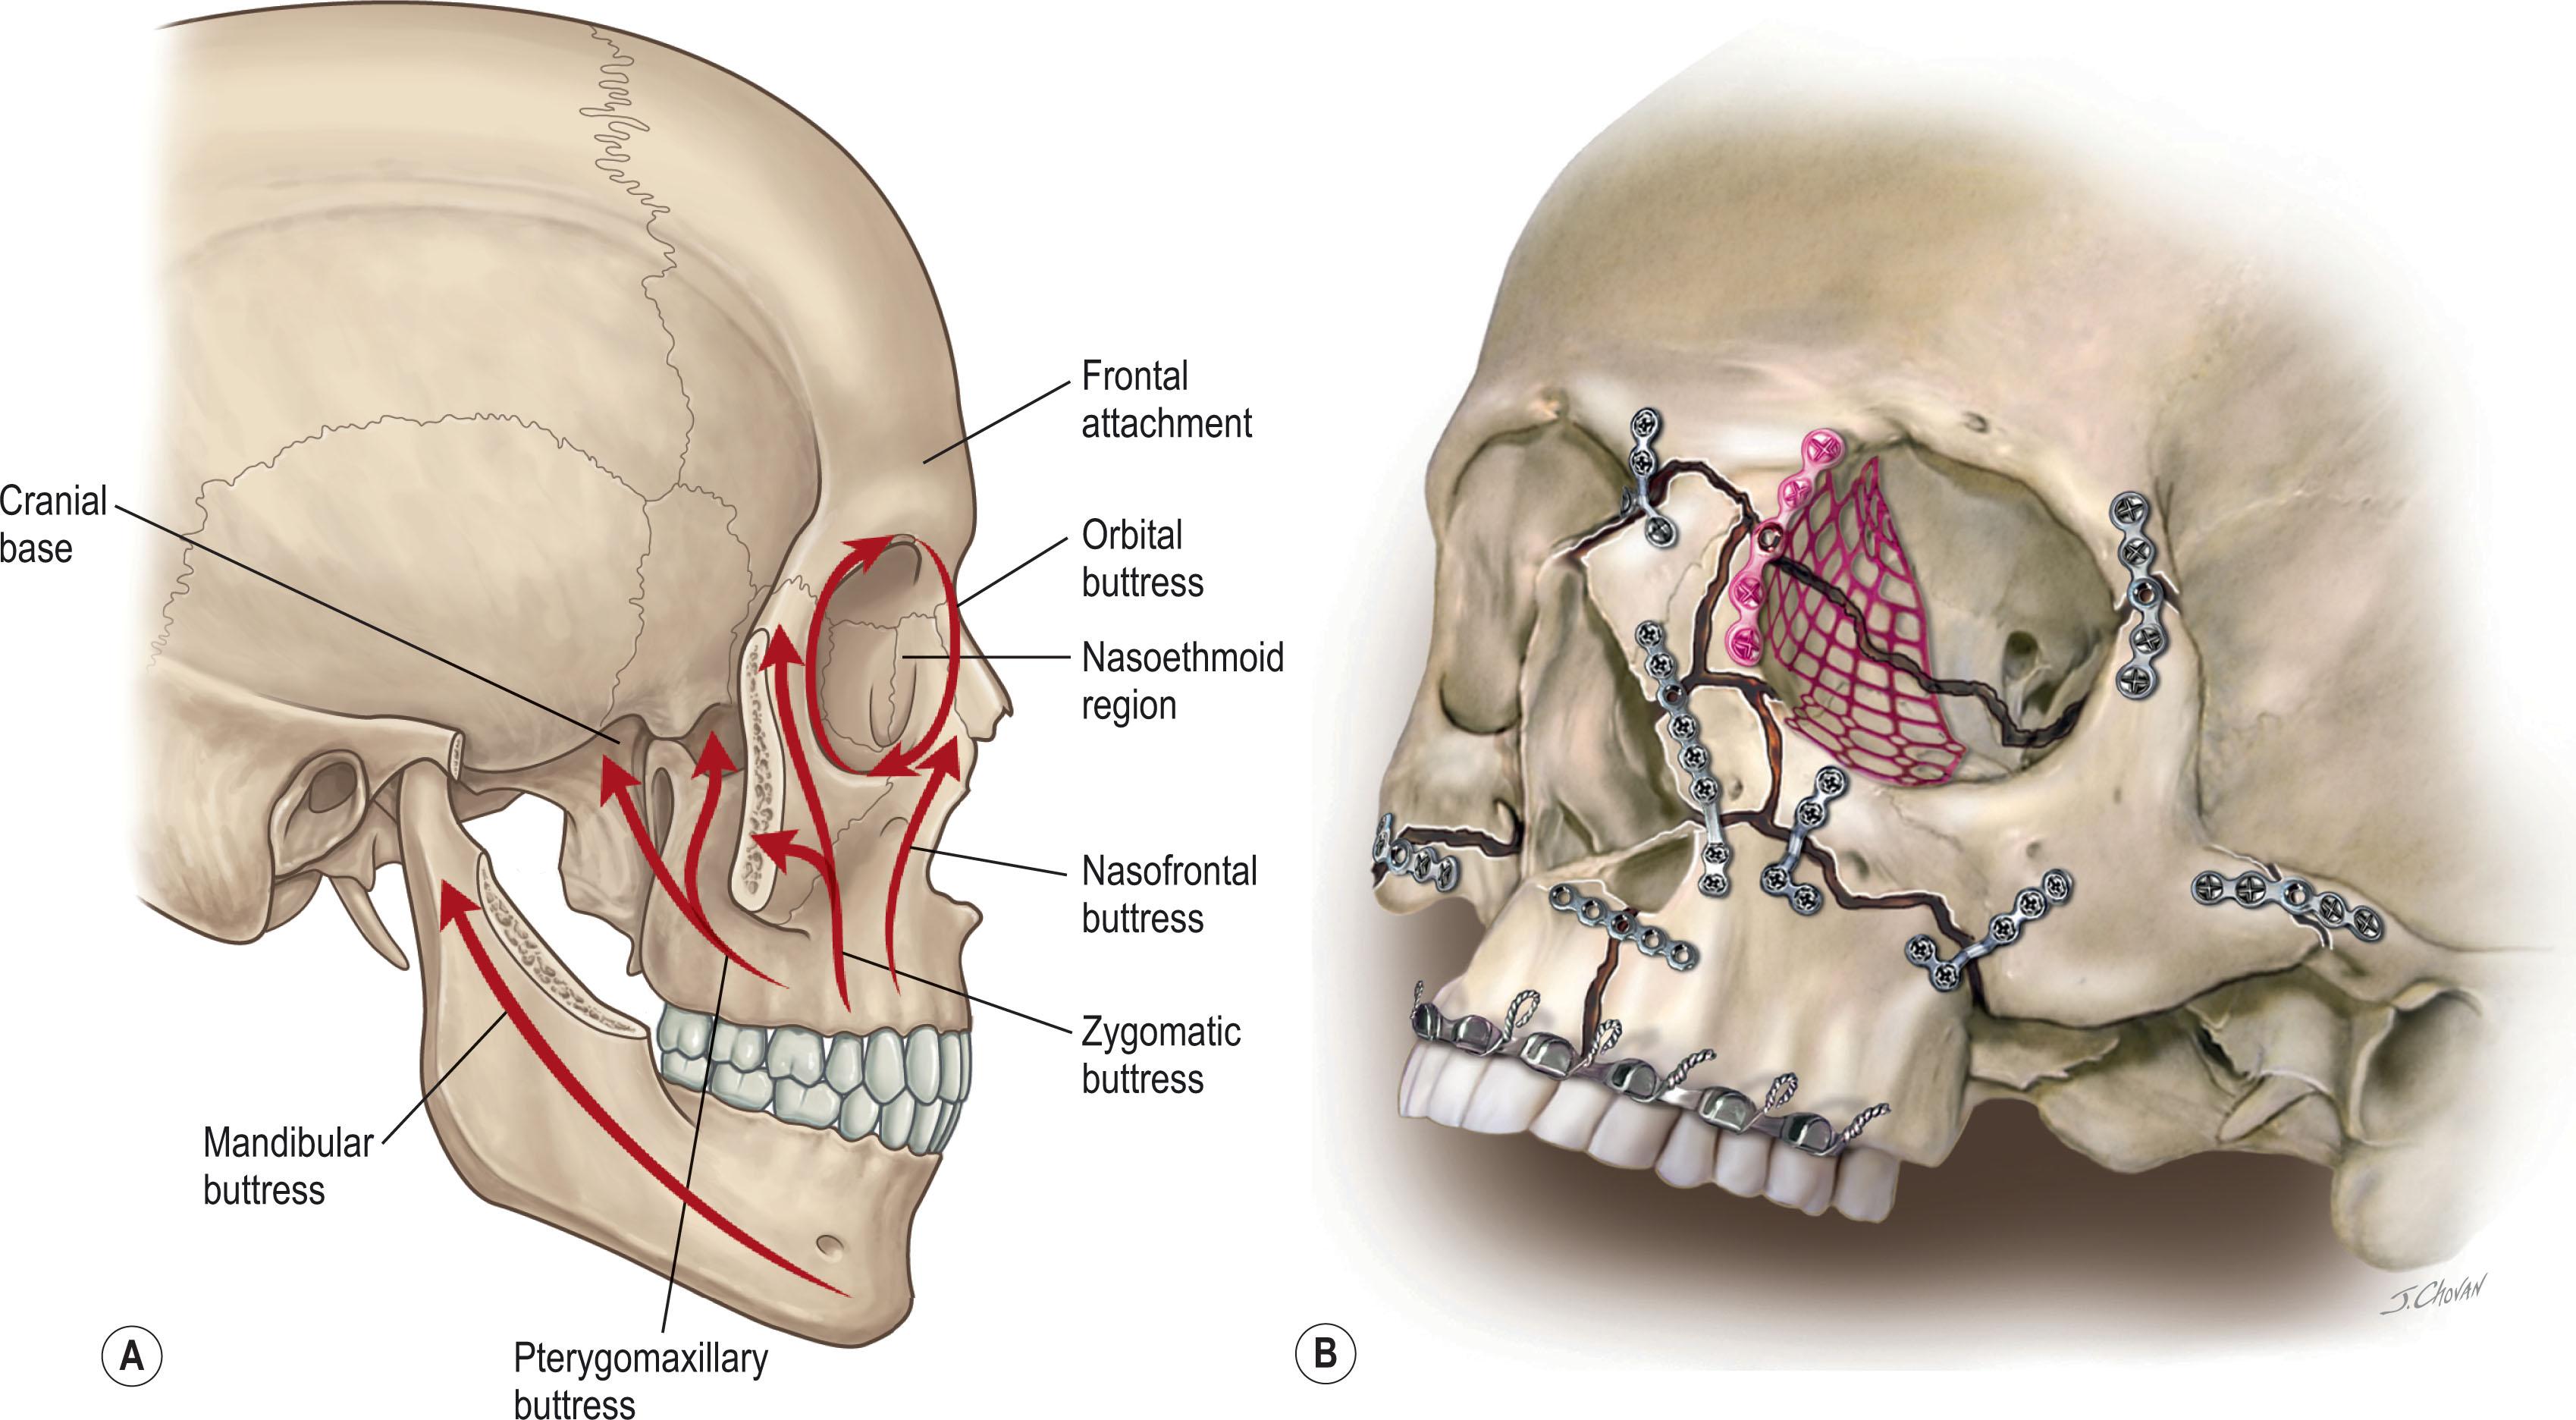 Figure 1.10, (A) The buttresses of the facial skeleton are areas where there is increased thickness of the bony skeleton. These areas act as “shock absorbers” to dissipate forces applied to the facial skeleton, decreasing the transmission to critical structures such as the globes, brain, and neck. (B) Rigid internal fixation is typically placed across the buttresses, as the bone quality here is sufficient, in most instances, to allow adequate screw purchase. When buttresses are disrupted, consideration should be given to reconstruction using autologous bone graft.